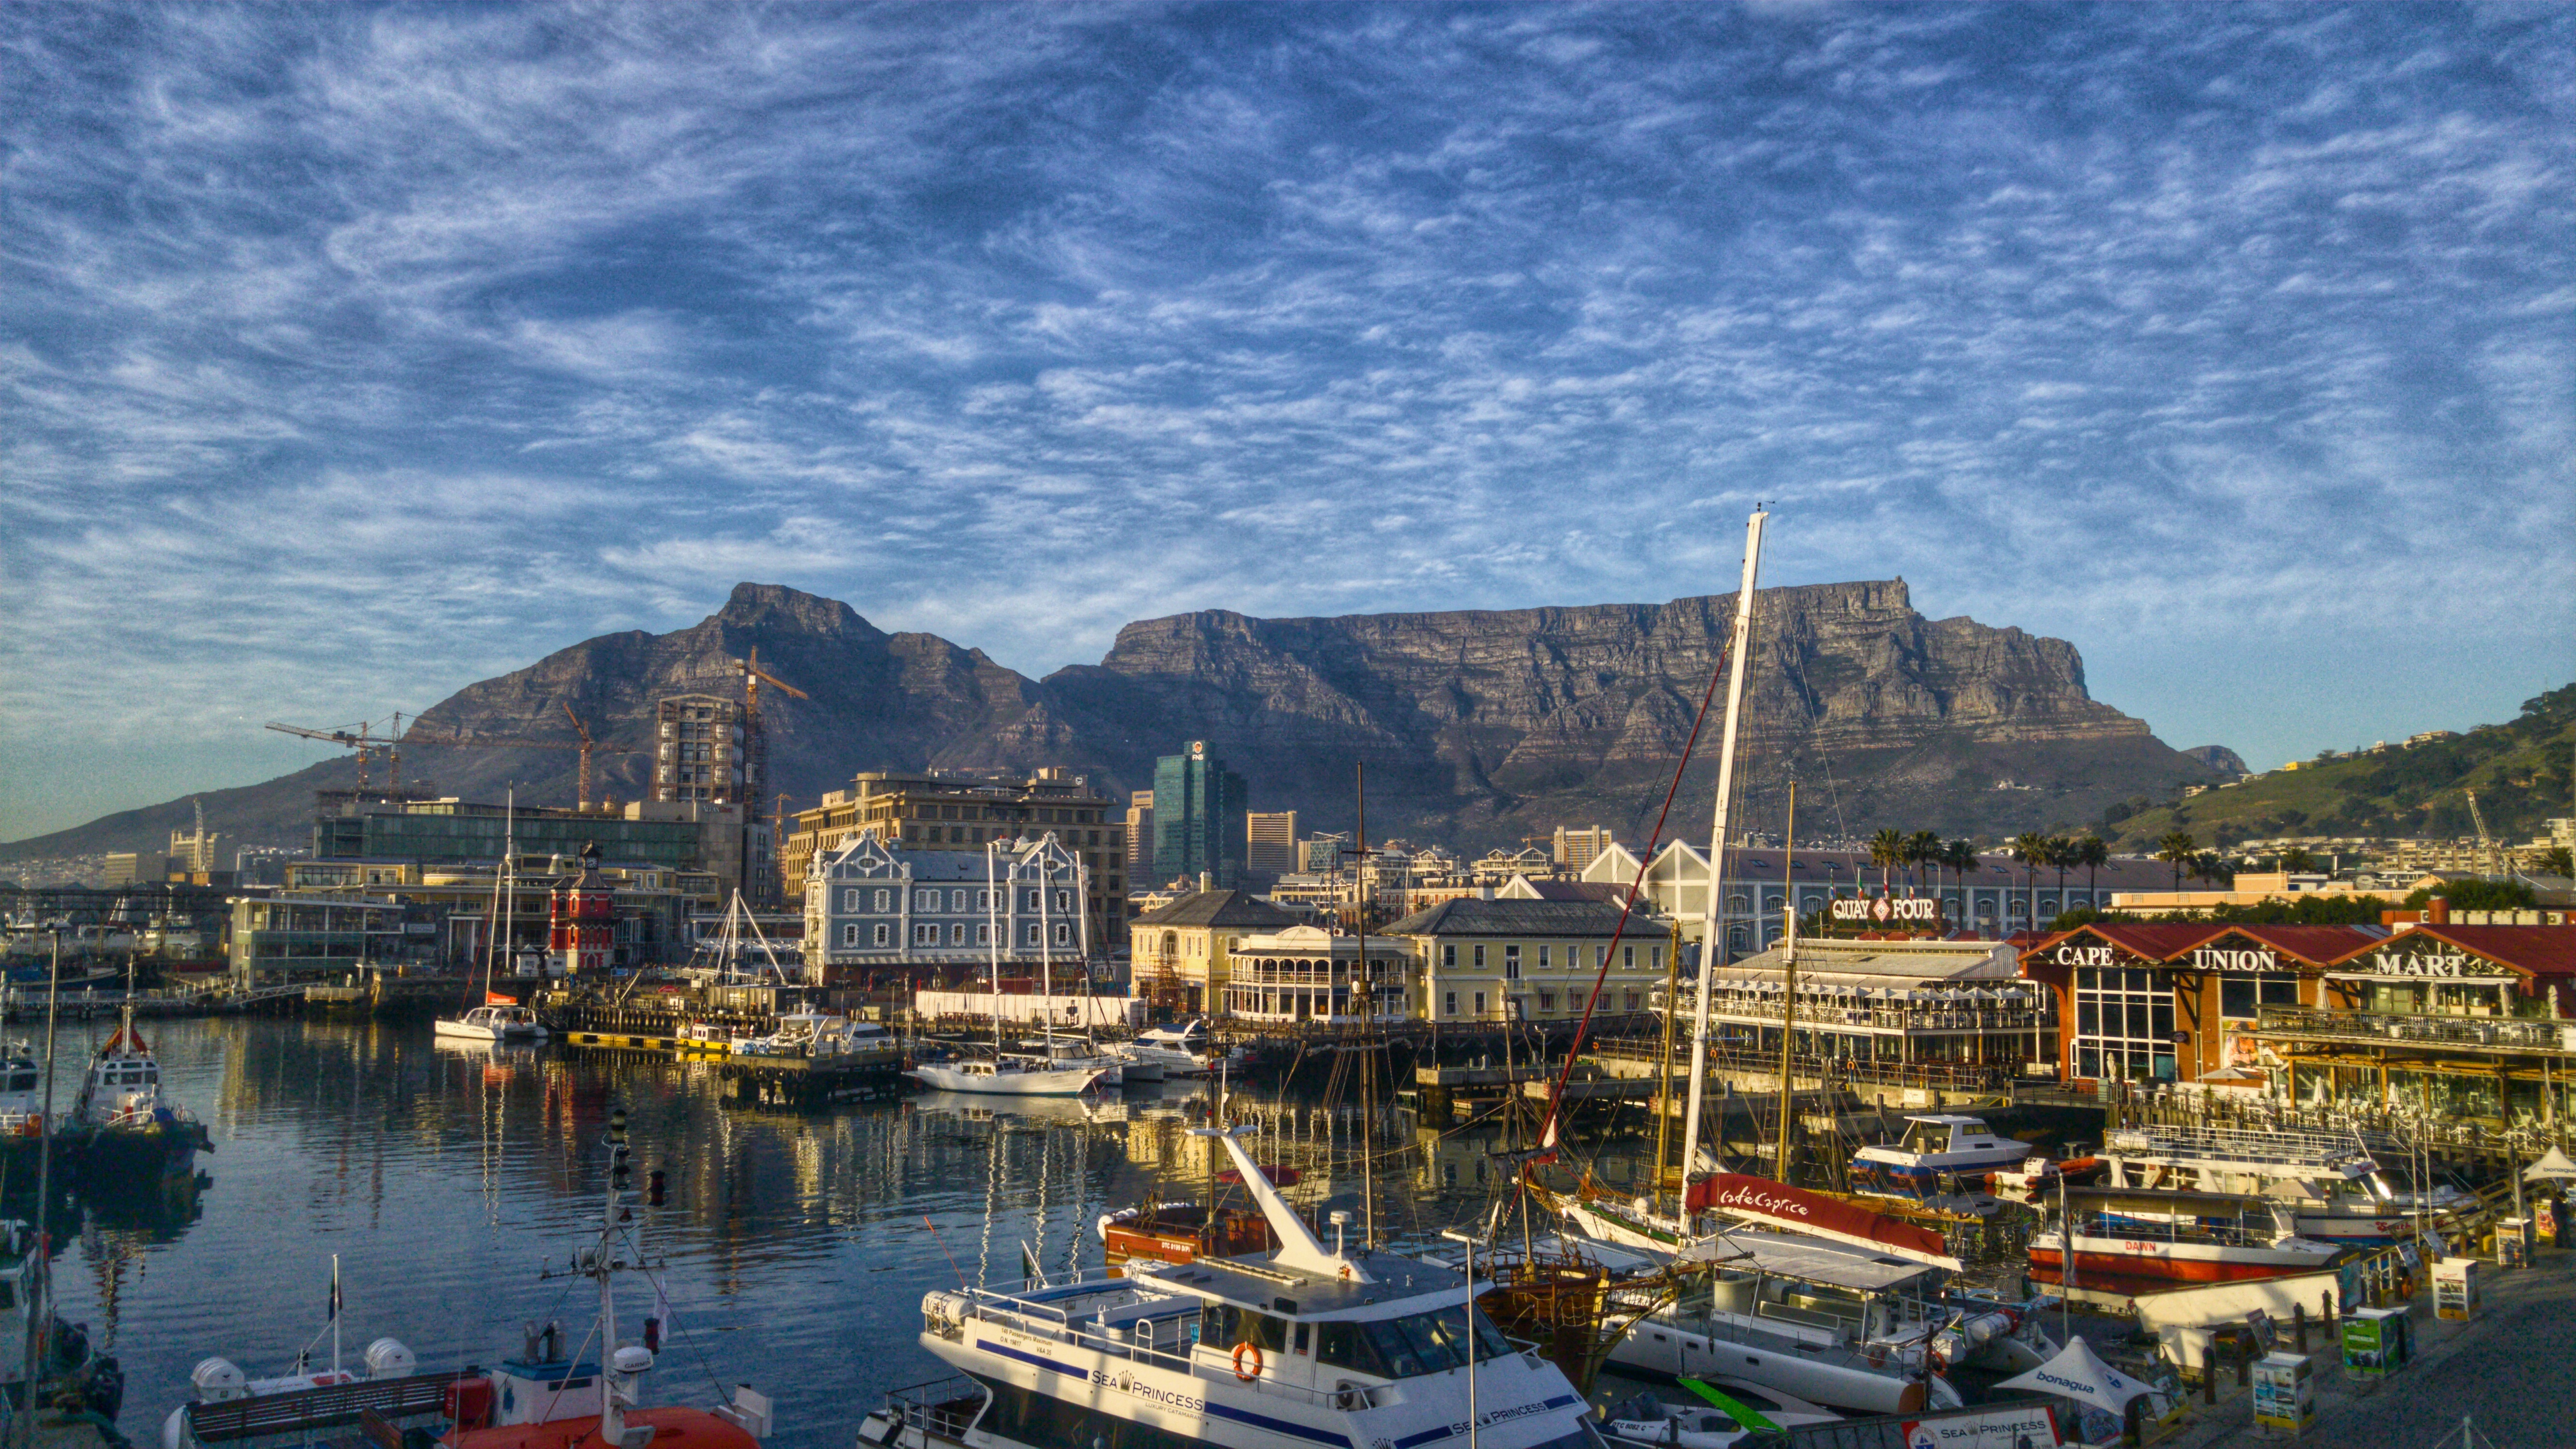 Cape Town: The Pride of South Africa